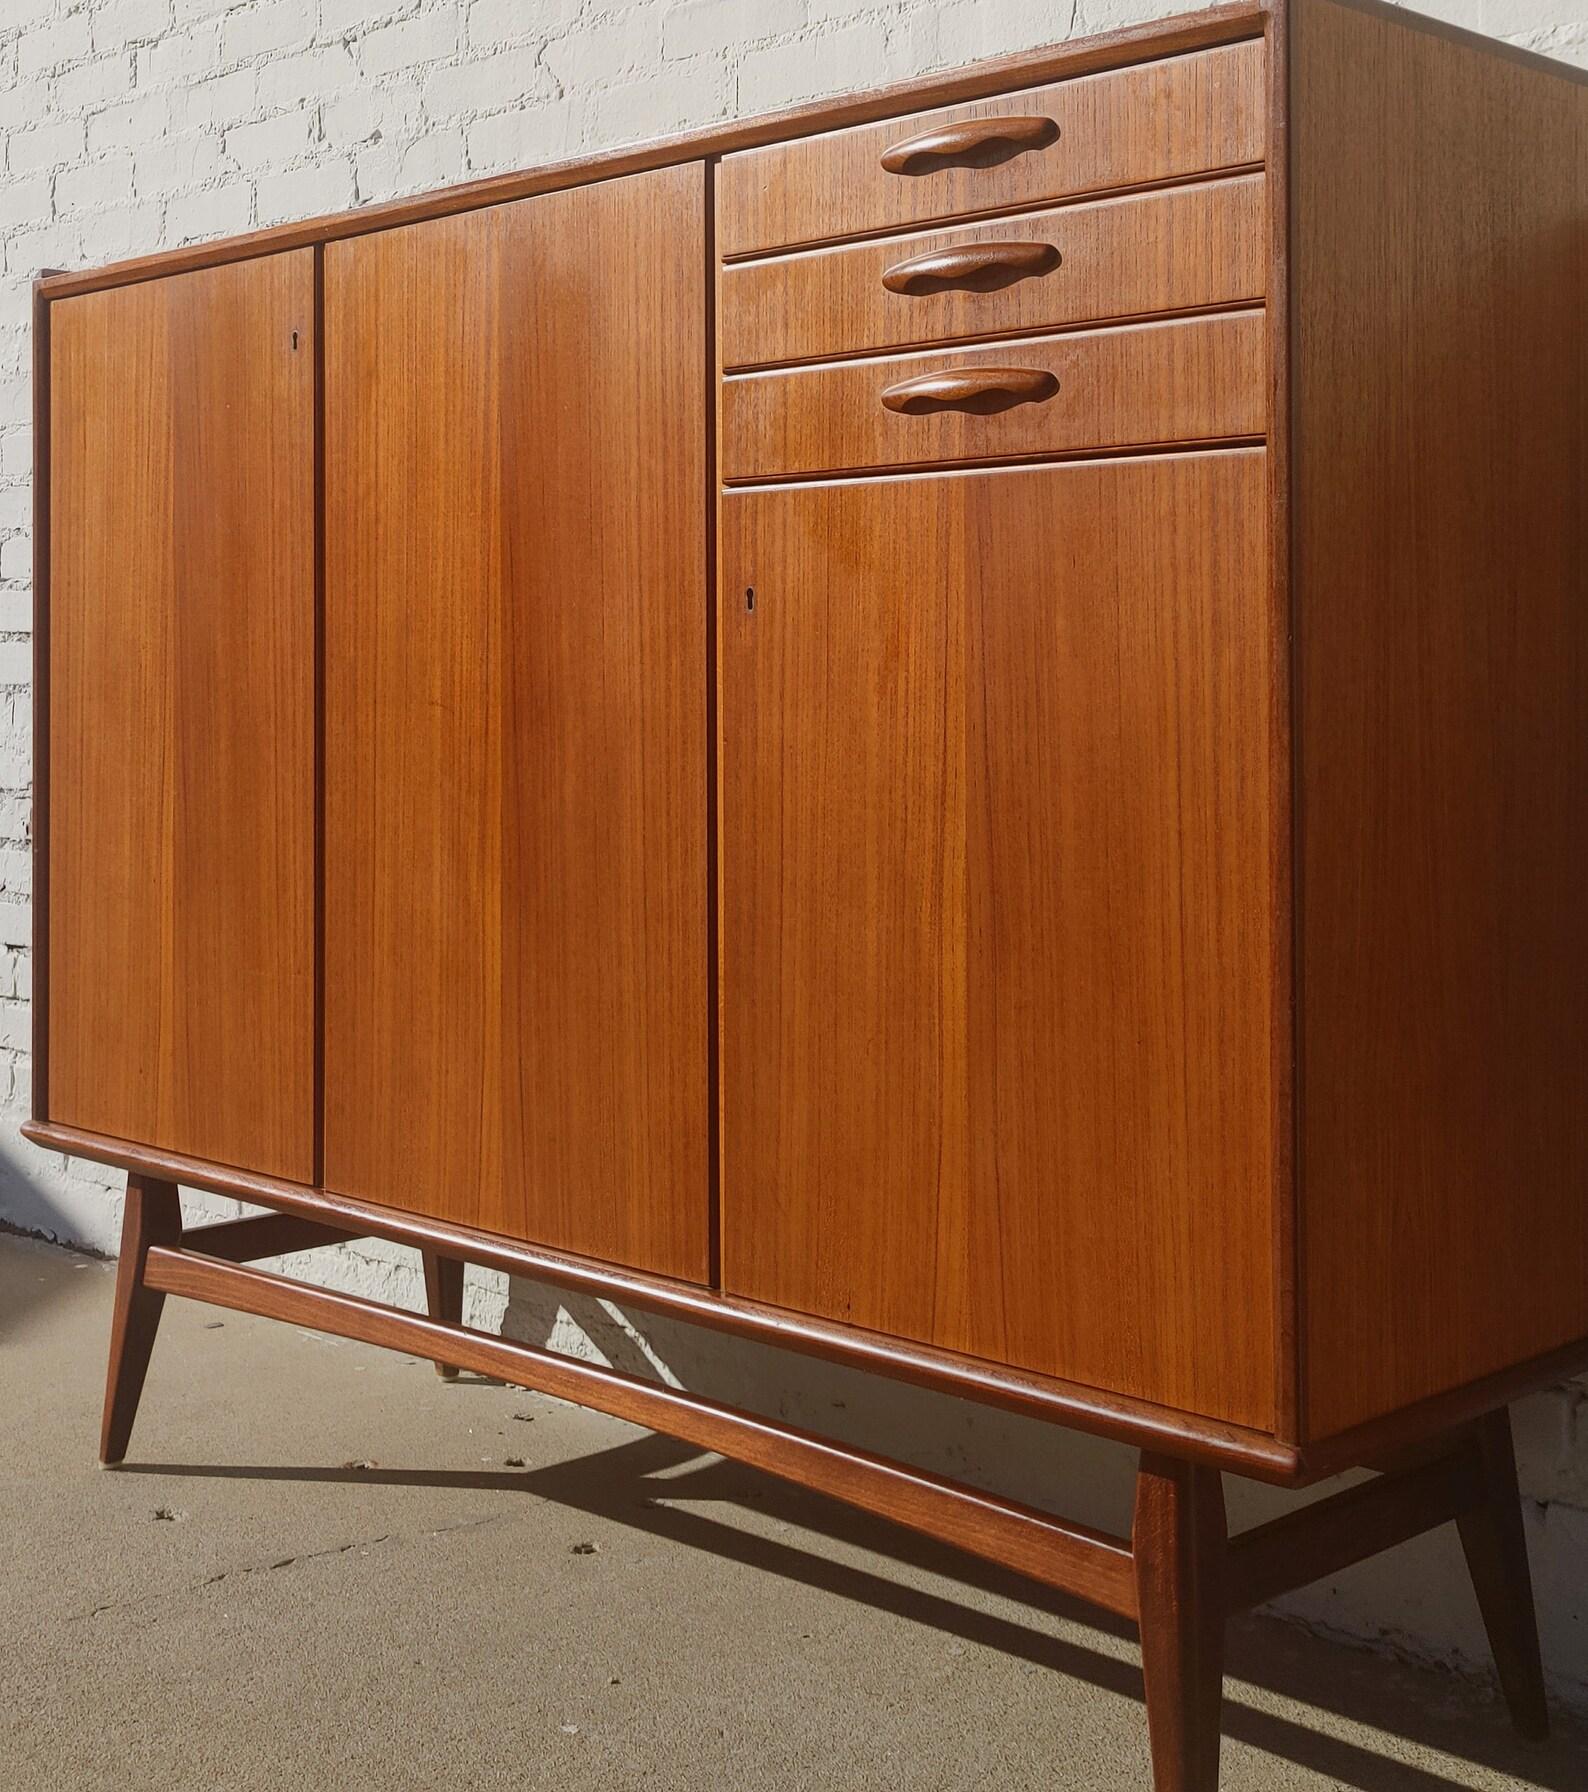 Mid Century Danish Modern Large Teak Cabinet

Above average vintage condition and structurally sound. Has some expected slight finish wear and scratching. Top has some very slight discolorations. Top has been refinished and does not have original